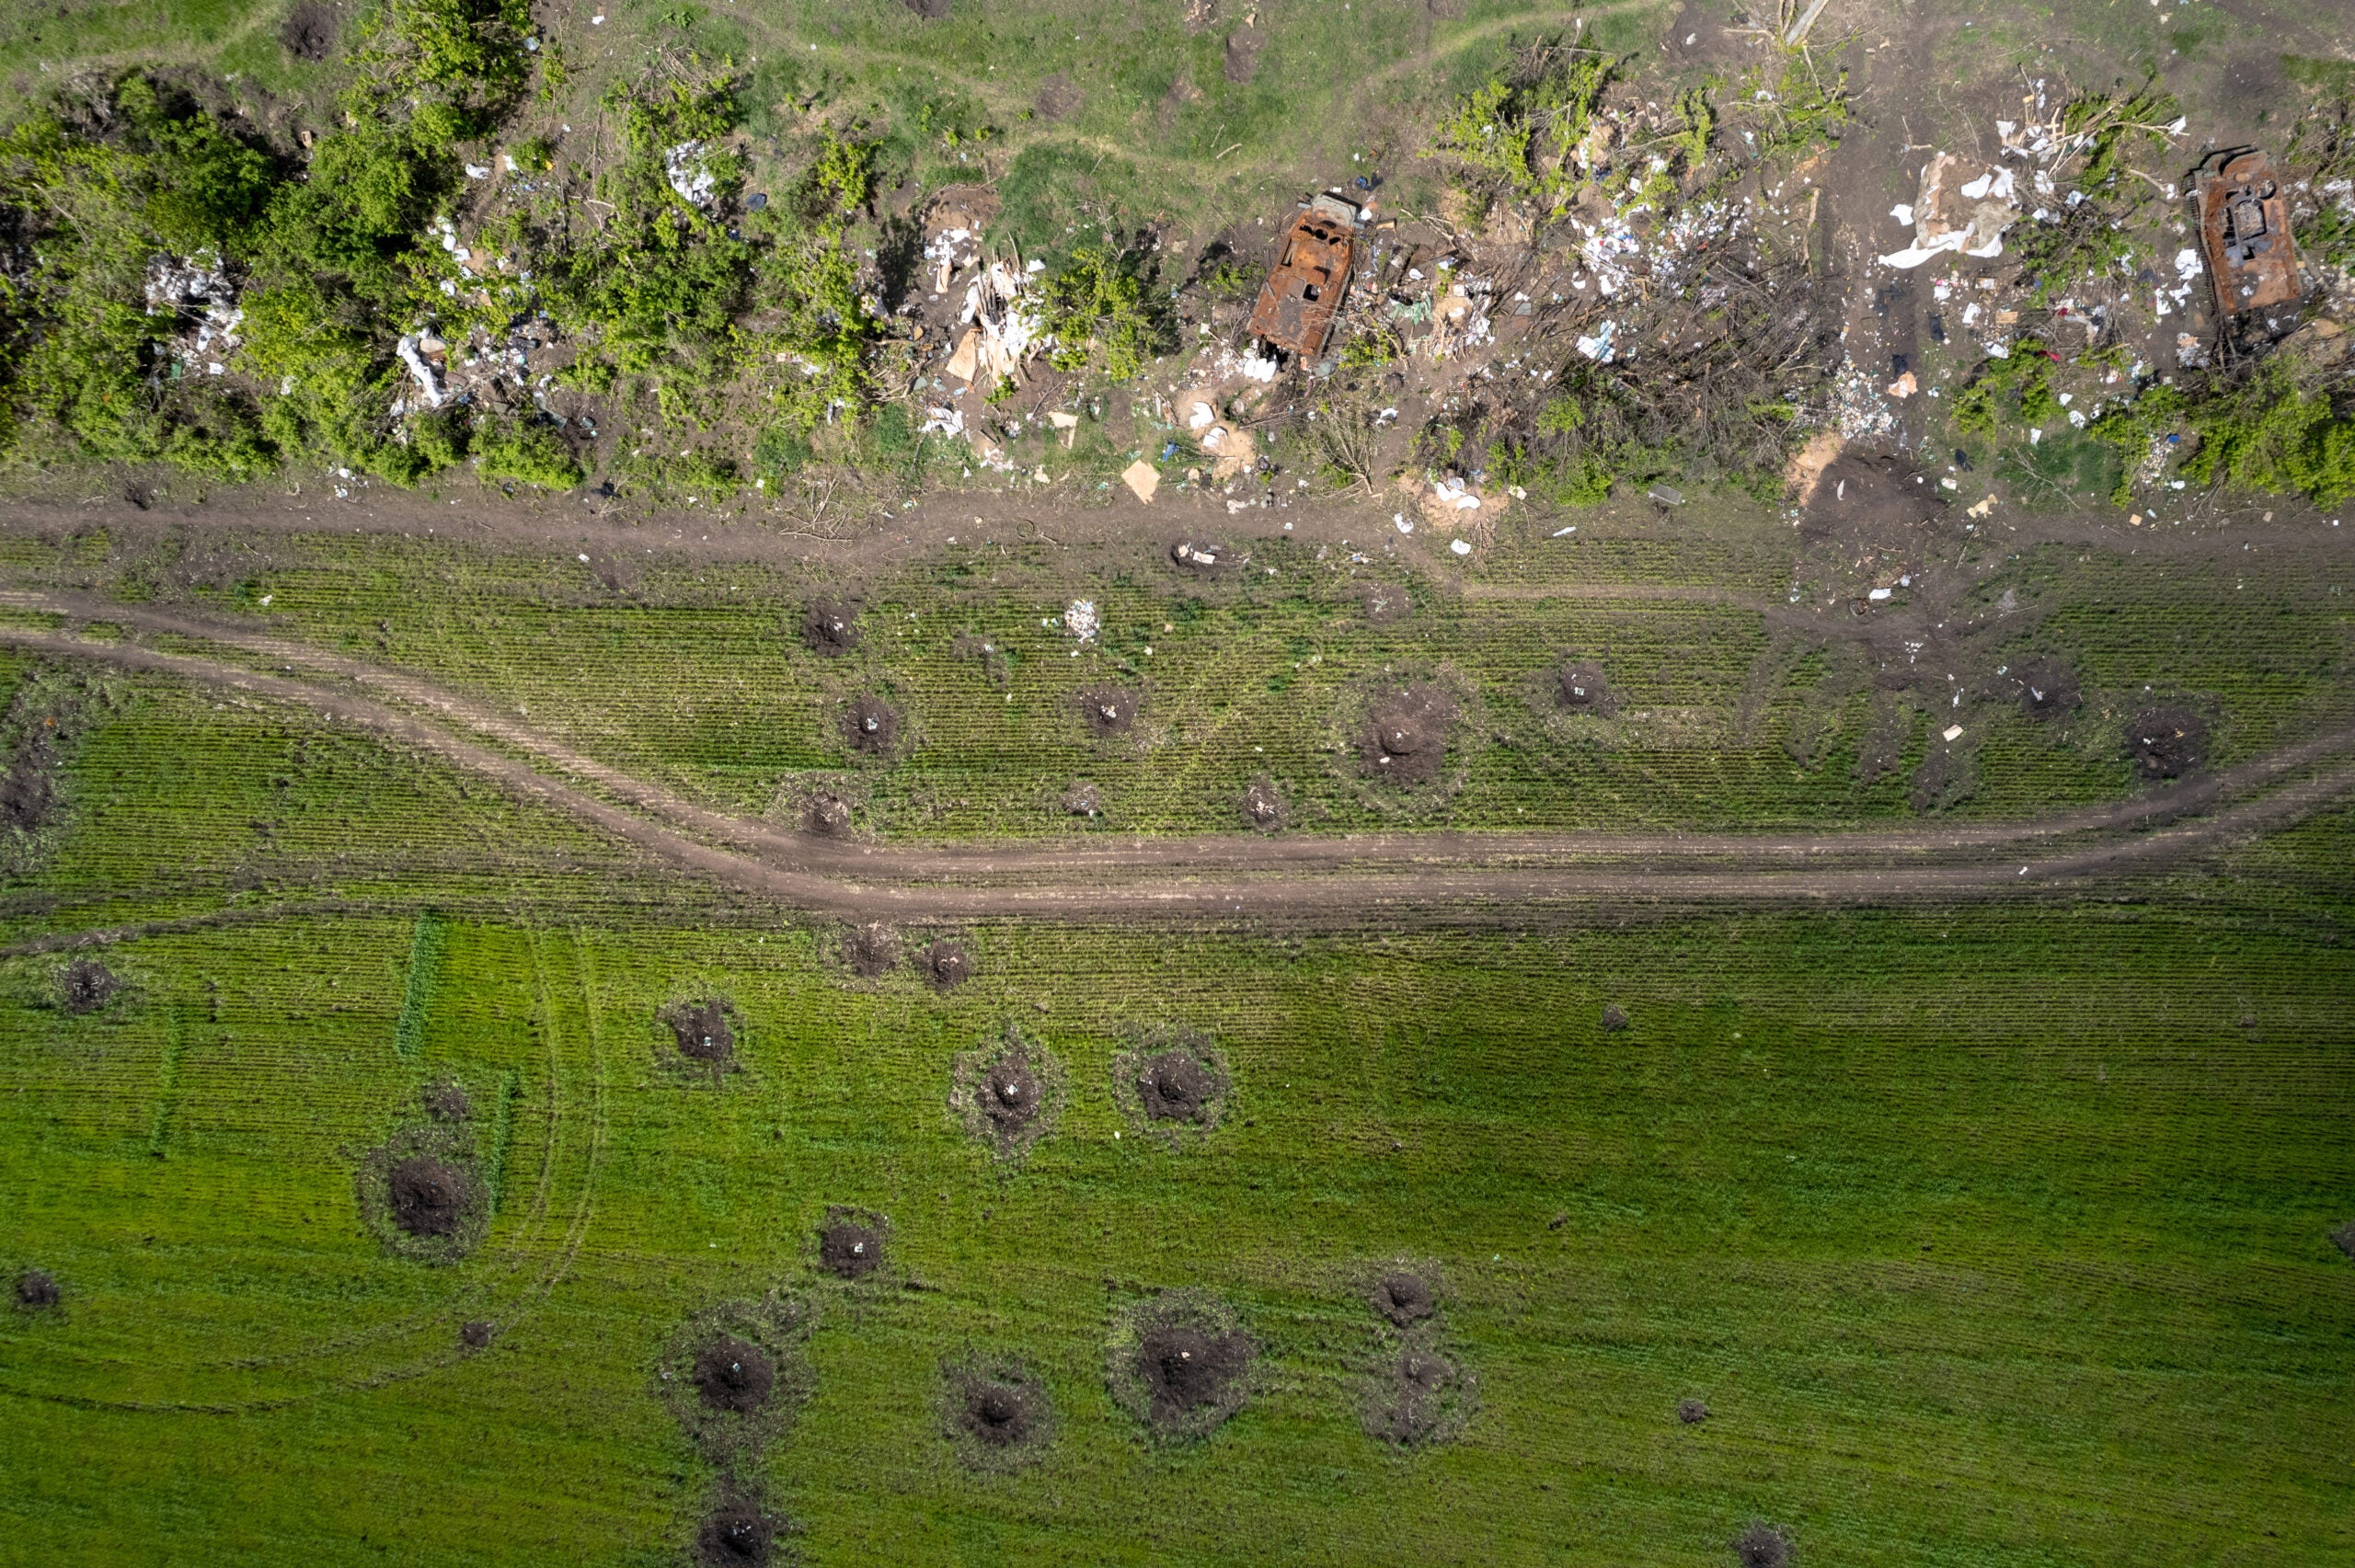 MALAYA ROHAN, UKRAINE - MAY 17:  In this aerial view, impact craters are seen next to an abandoned Russian army encampment in a tree line on May 17, 2022 in Malaya Rohan, Ukraine. For weeks Russia has been withdrawing forces from around Kharkiv, Ukraine's second-largest city, suggesting it may redirect troops to fighting in other areas of eastern Ukraine. (Photo by John Moore/Getty Images)